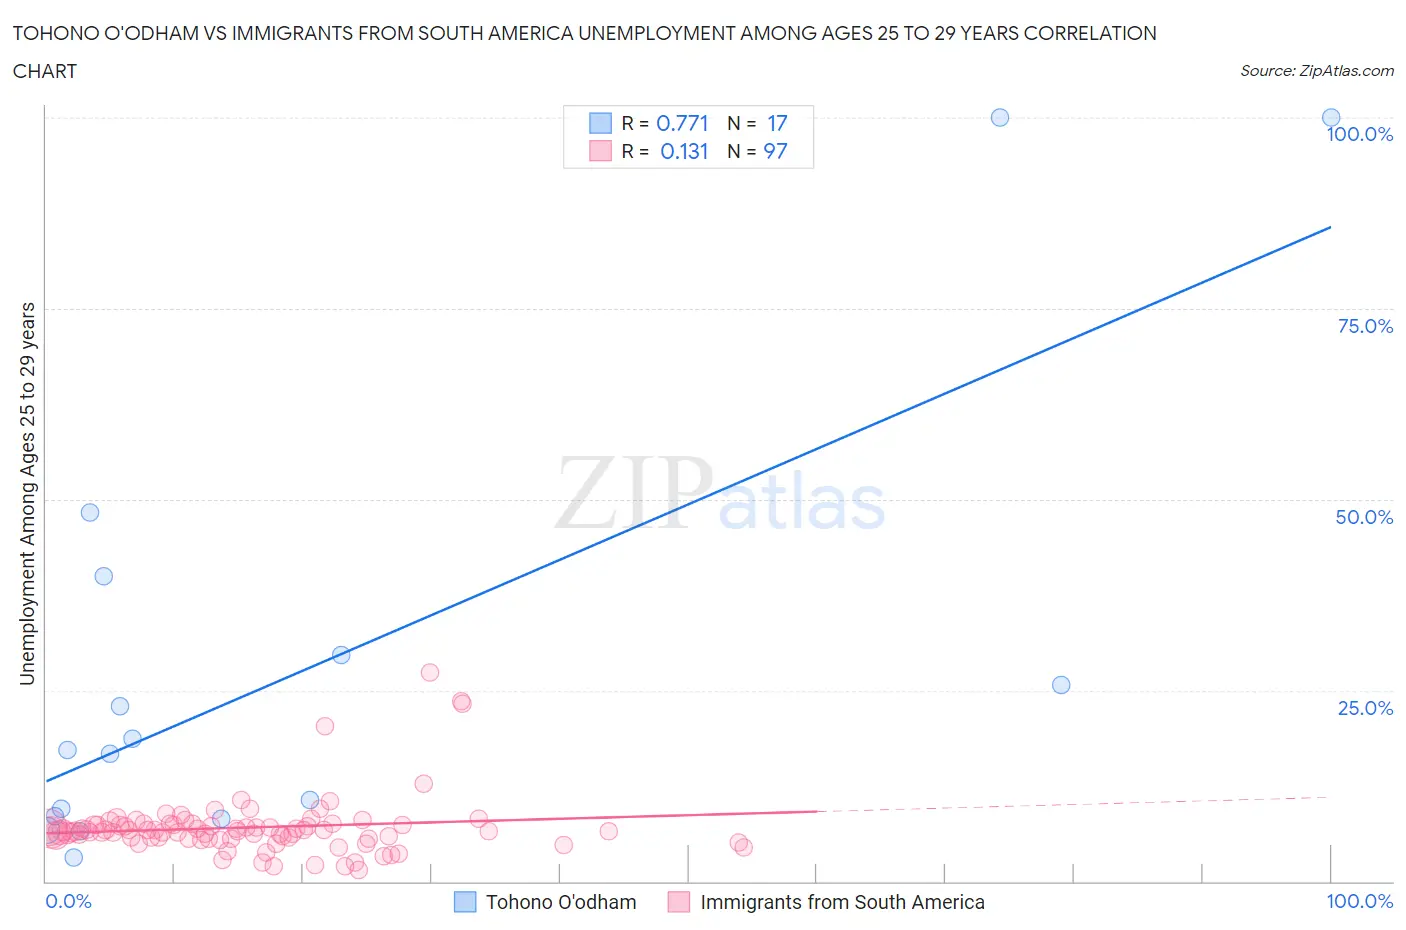 Tohono O'odham vs Immigrants from South America Unemployment Among Ages 25 to 29 years